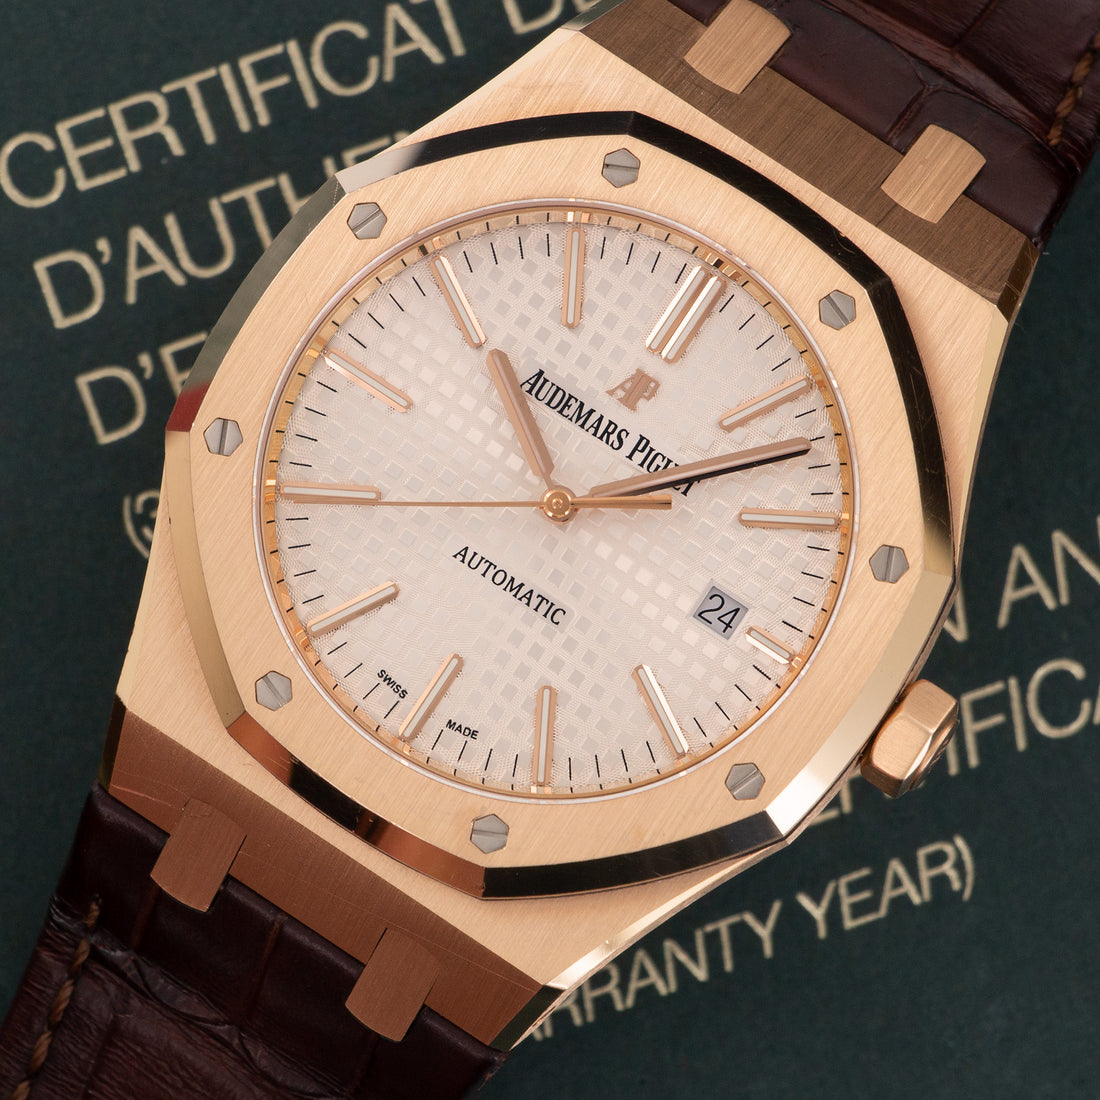 Audemars Piguet Rose Gold Royal Oak Watch Ref. 15400, with Box and Papers